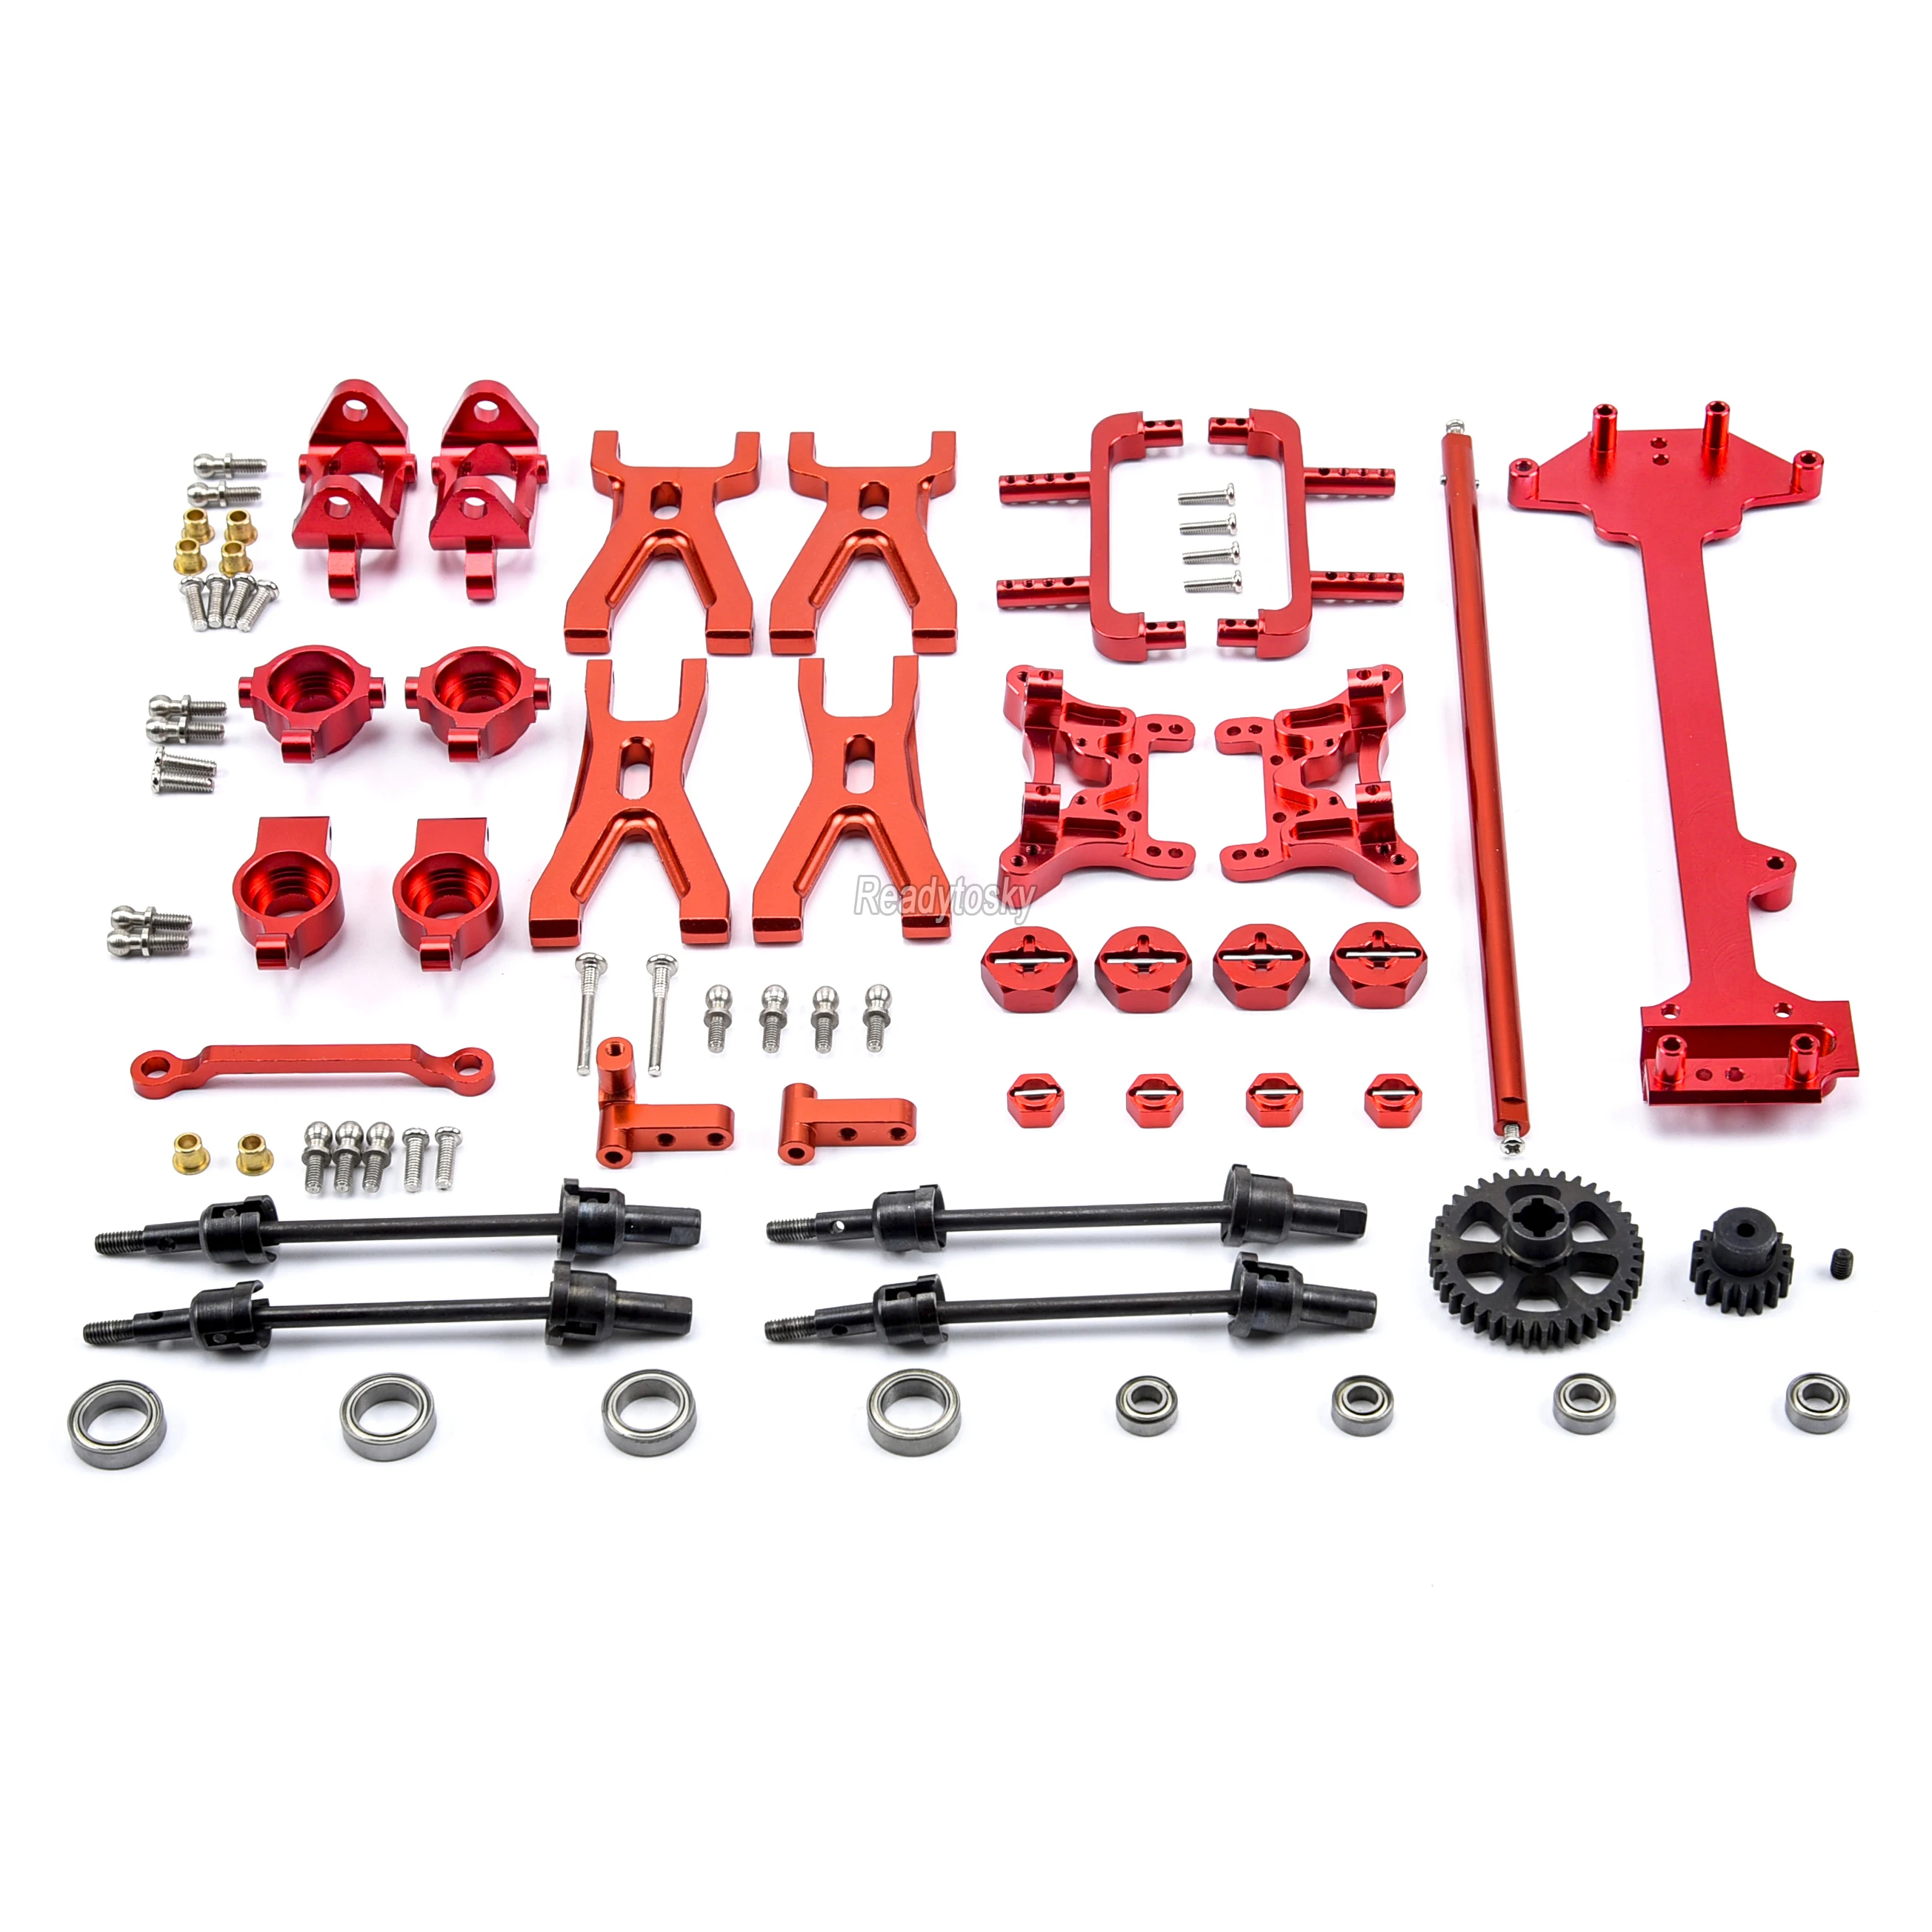 

Metal Upgrade Parts Kit for 1/18 Wltoys A959 A979 A959B A979B 4WD Electric RC Car Off-Road Buggy Hop-Up RC Car Spare Parts